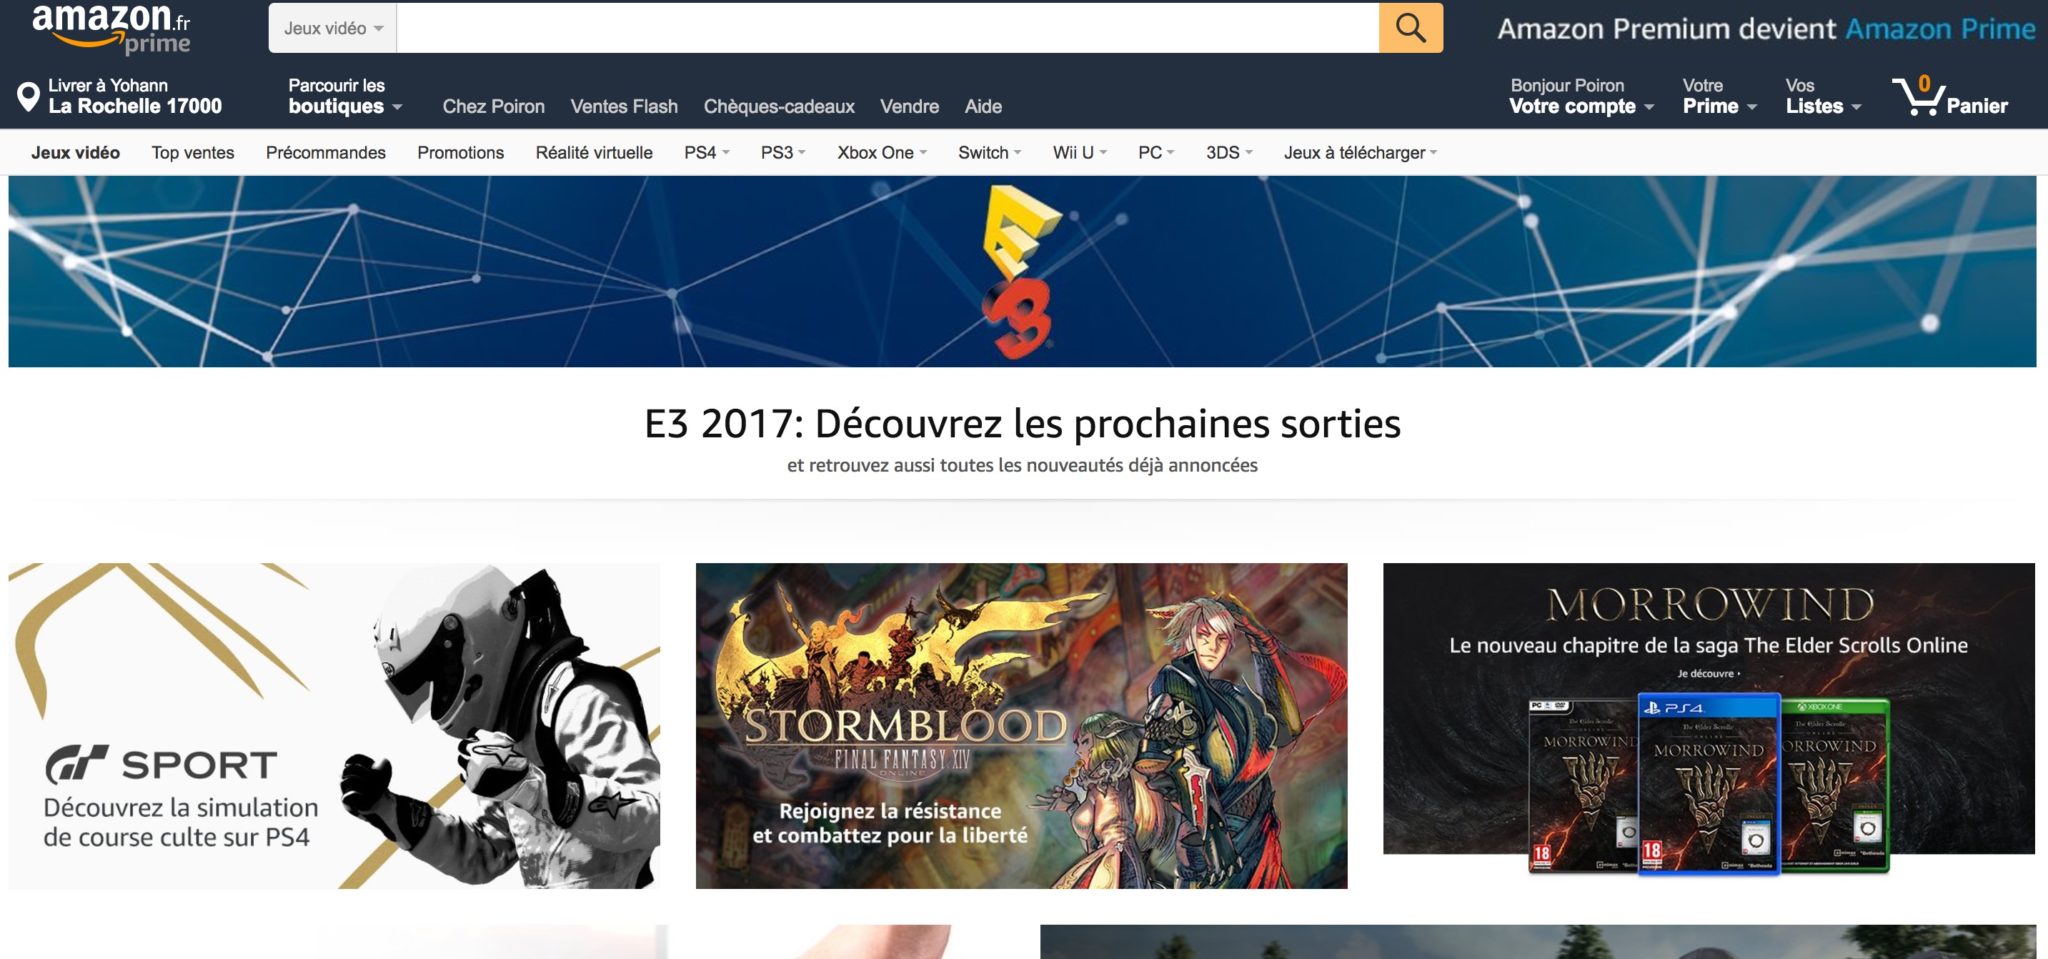 e3 2017 amazon propose semaine offres exclusives gaming